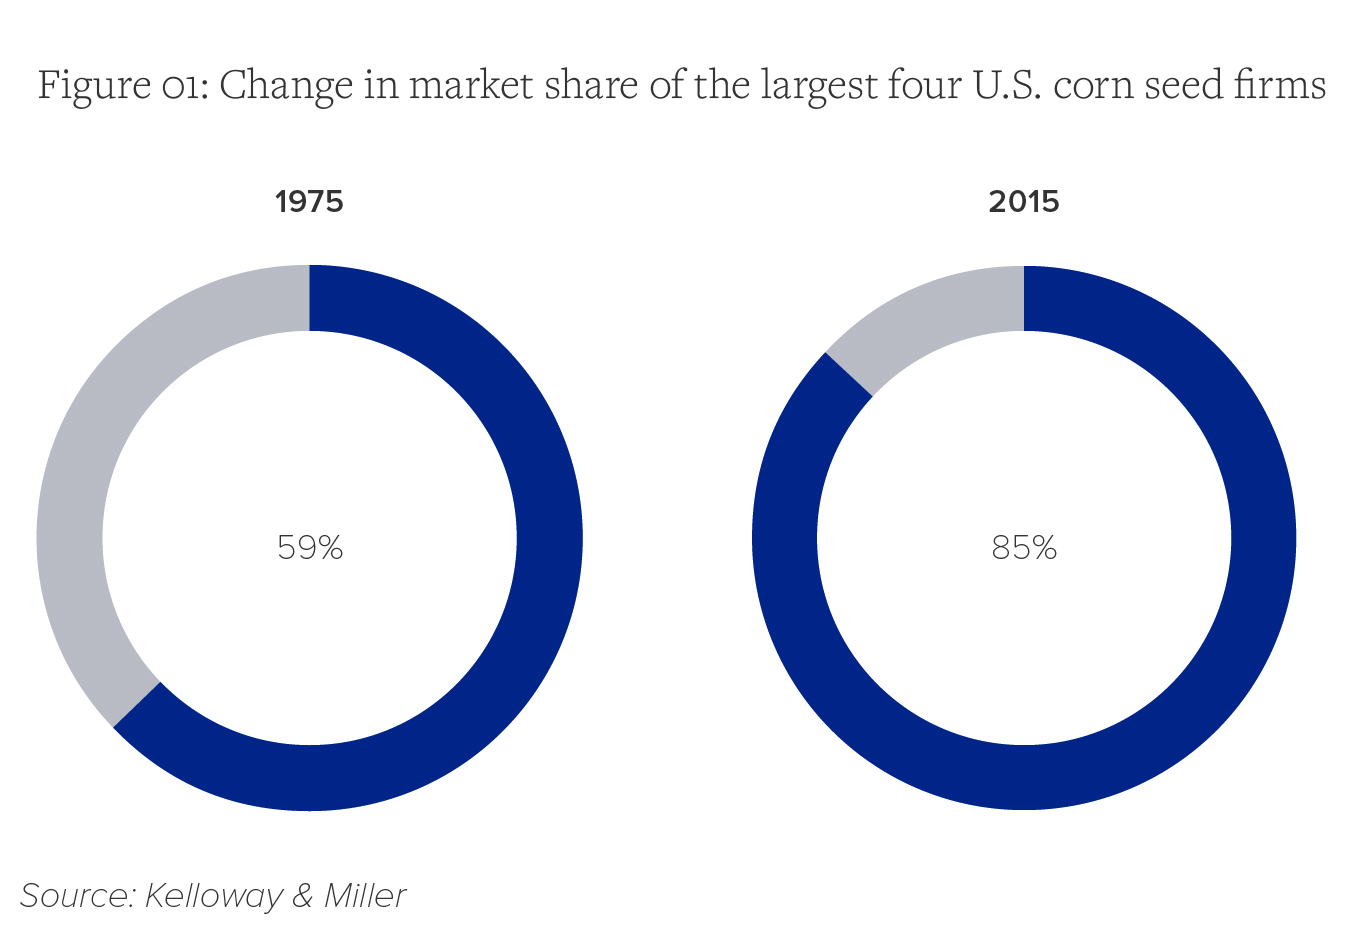 Change in market share of the largest four U.S. corn seed firms